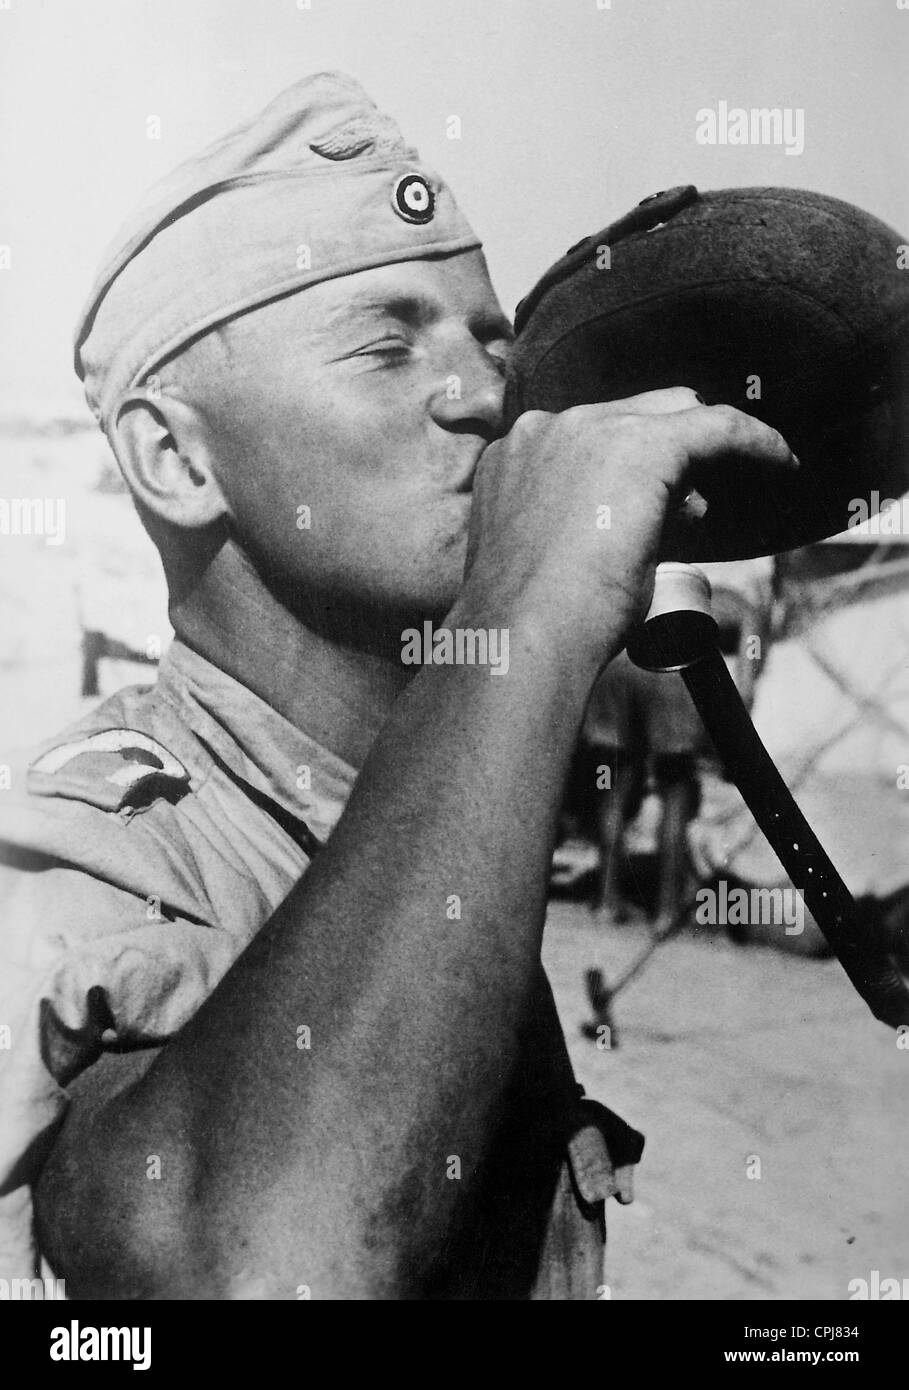 A German soldier drinking from a water bottle, 1942 Stock Photo